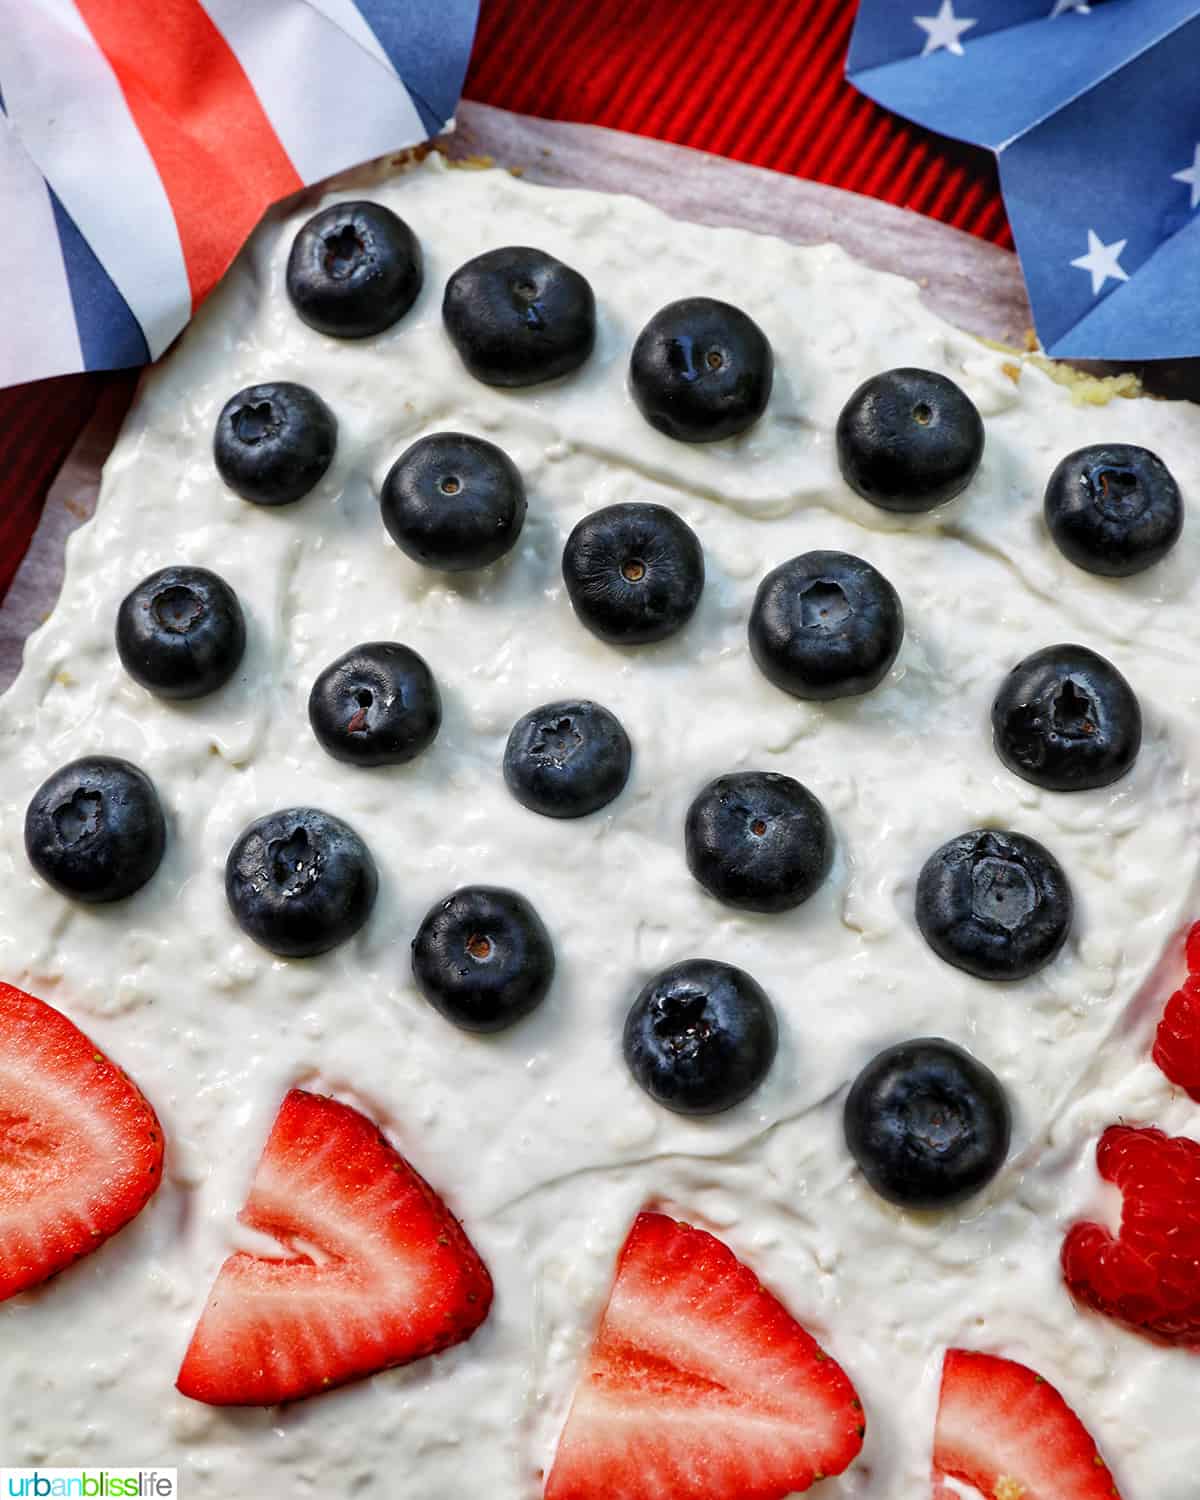 4th of July Fruit Pizza with blueberries, strawberries, raspberries